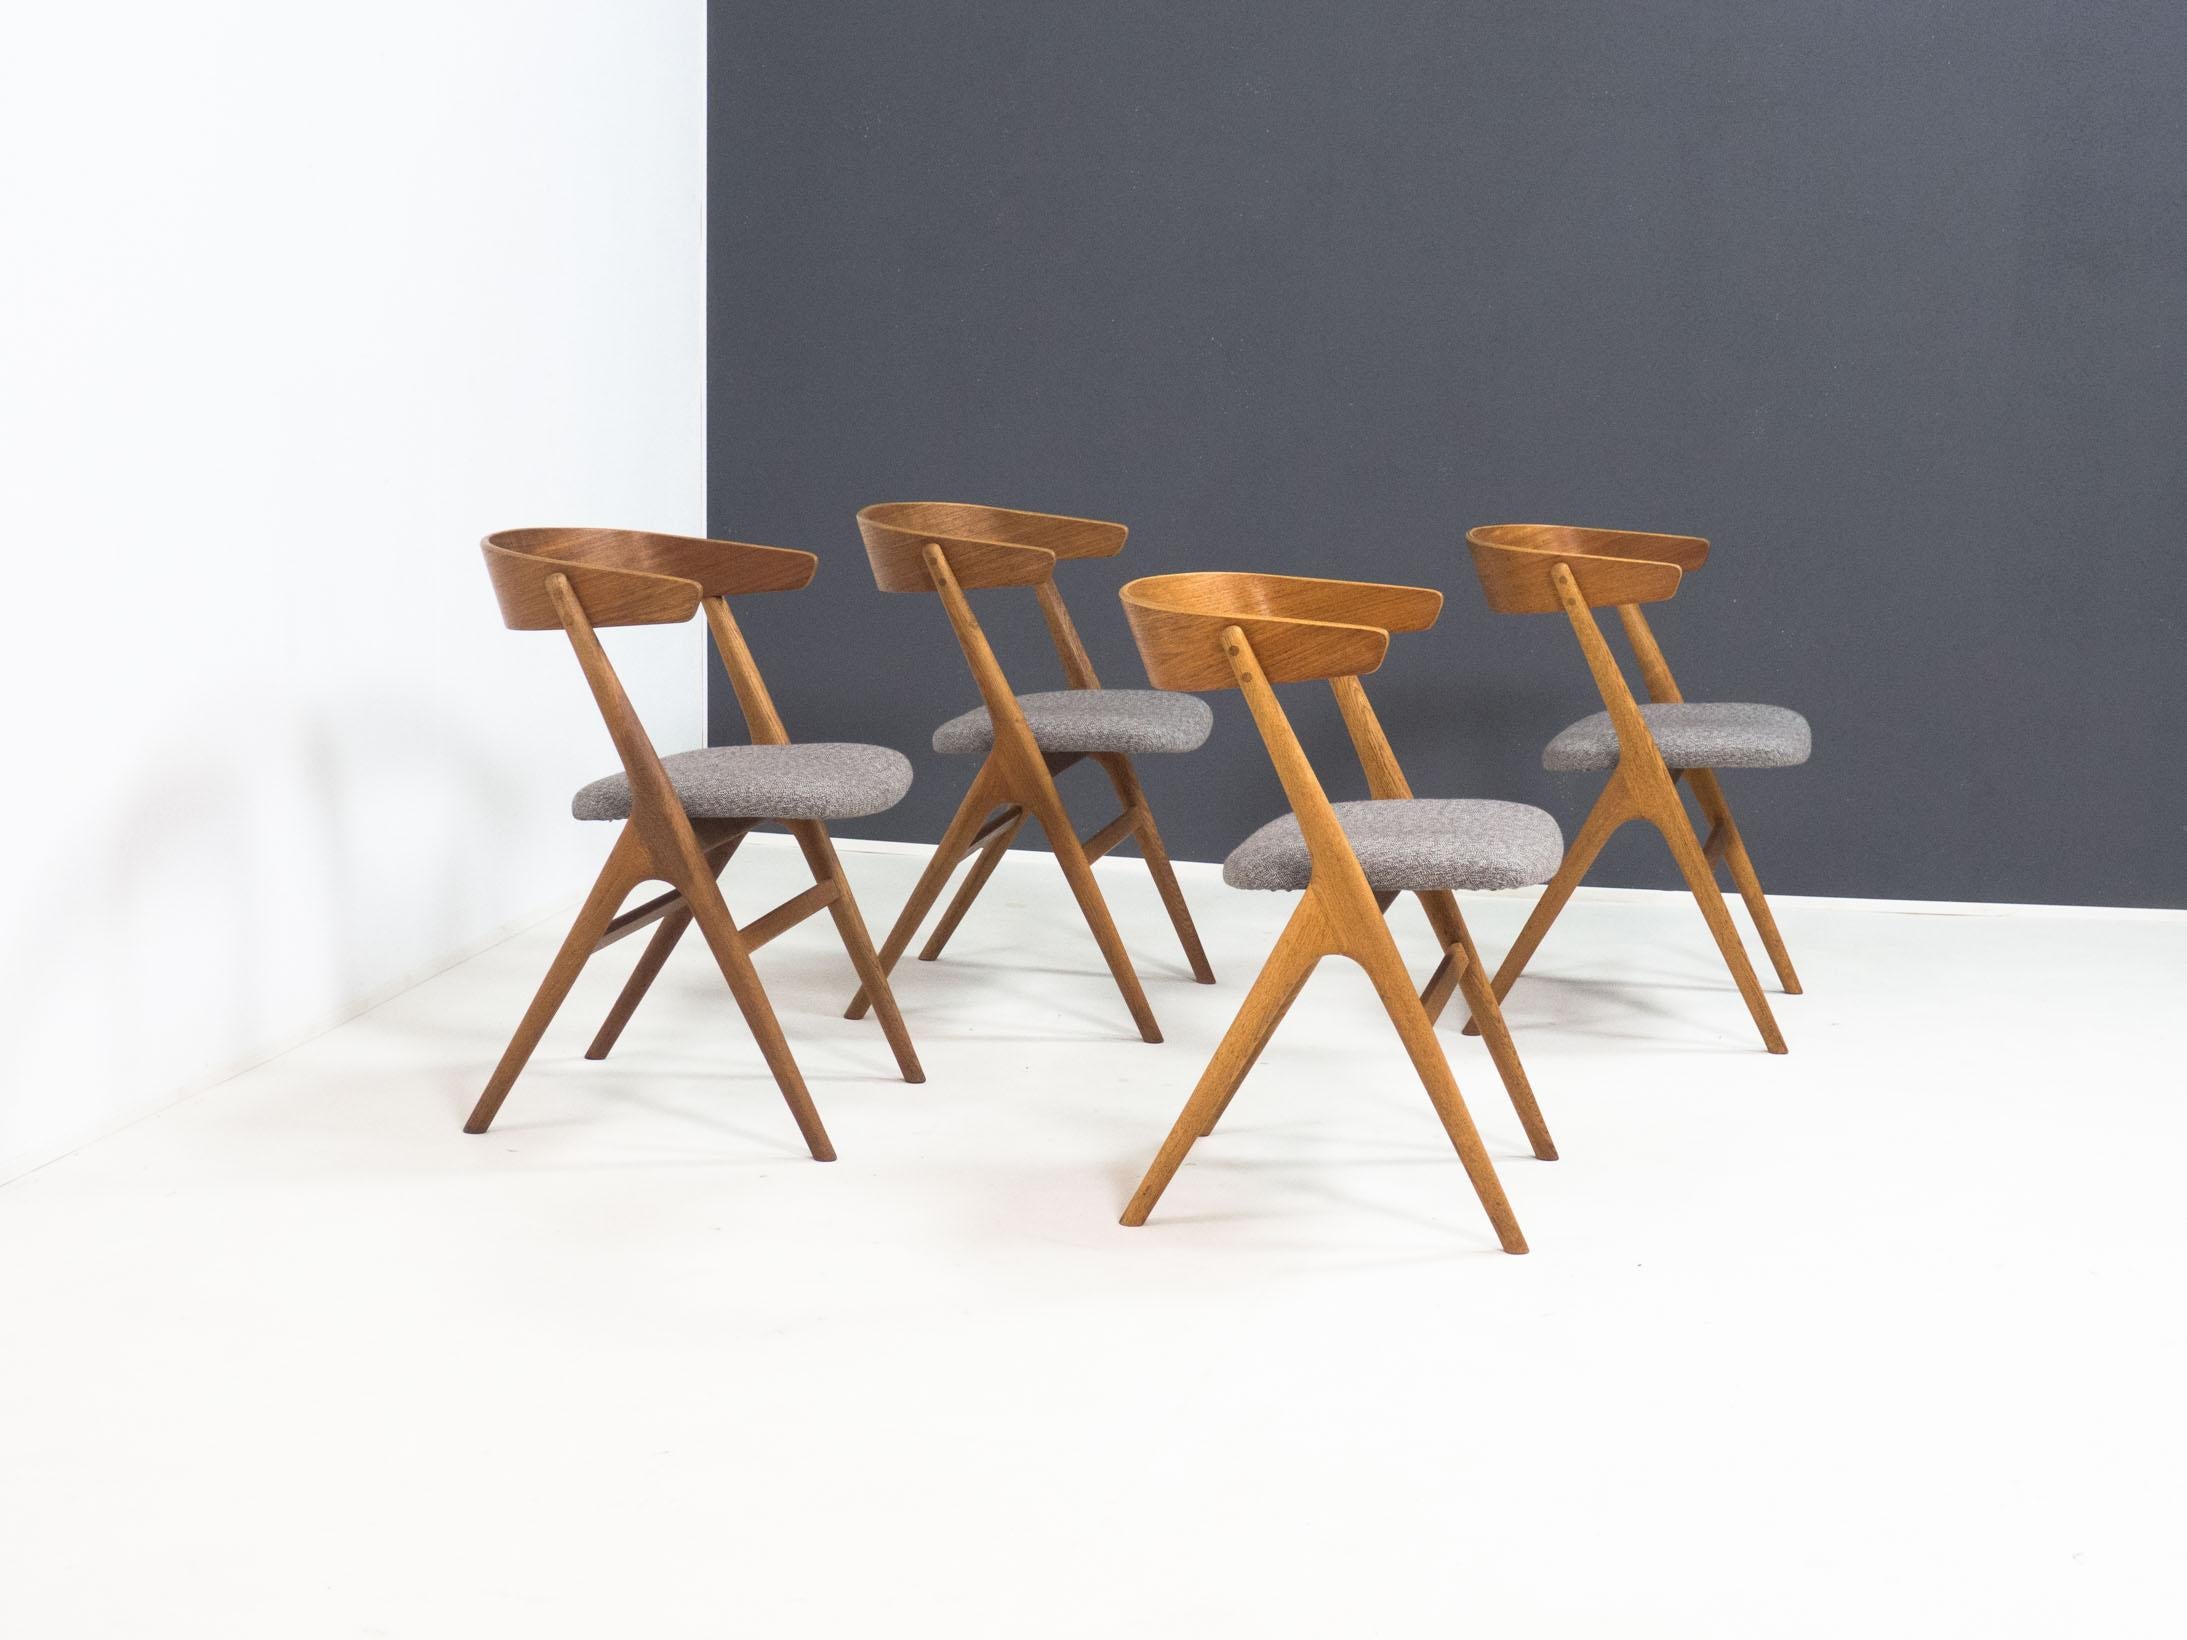 Set of four dining chairs designed by Helge Sibast for Sibast of Denmark, 1950s.

The chairs are made of a solid oak frame, with a teak veneered curved plywood backrest. They are reupholstered in a subtle brown white wool mix.

These chairs are